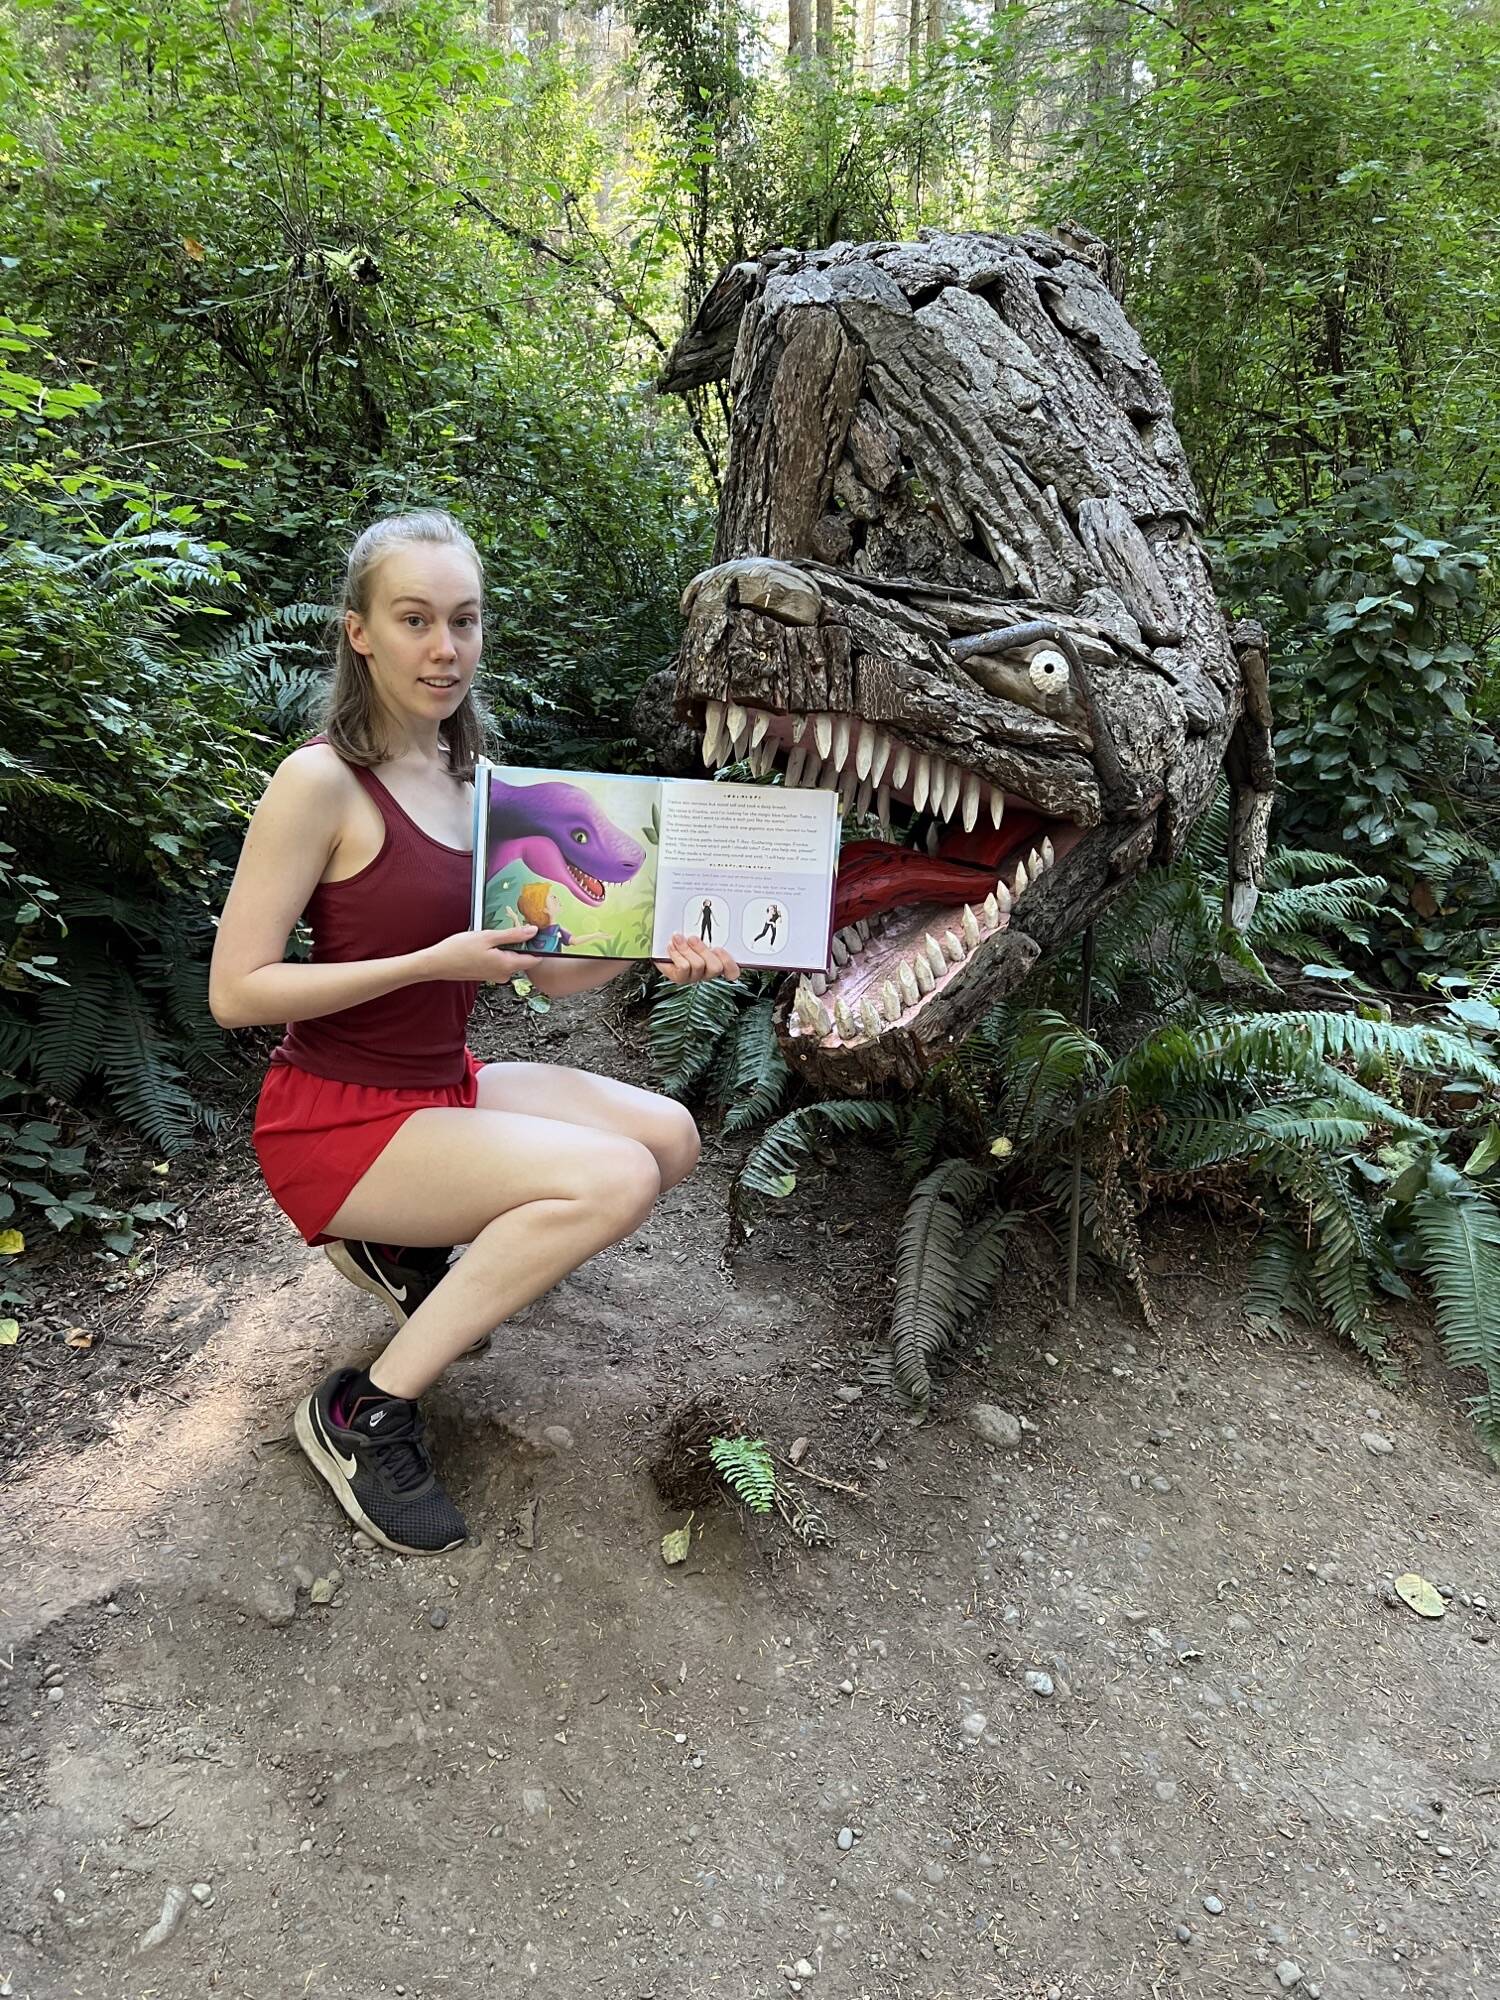 Kaelyn Lefferts with Joe Treat’s driftwood T-rex sculpture in the Price Sculpture Forest. (Photo provided)